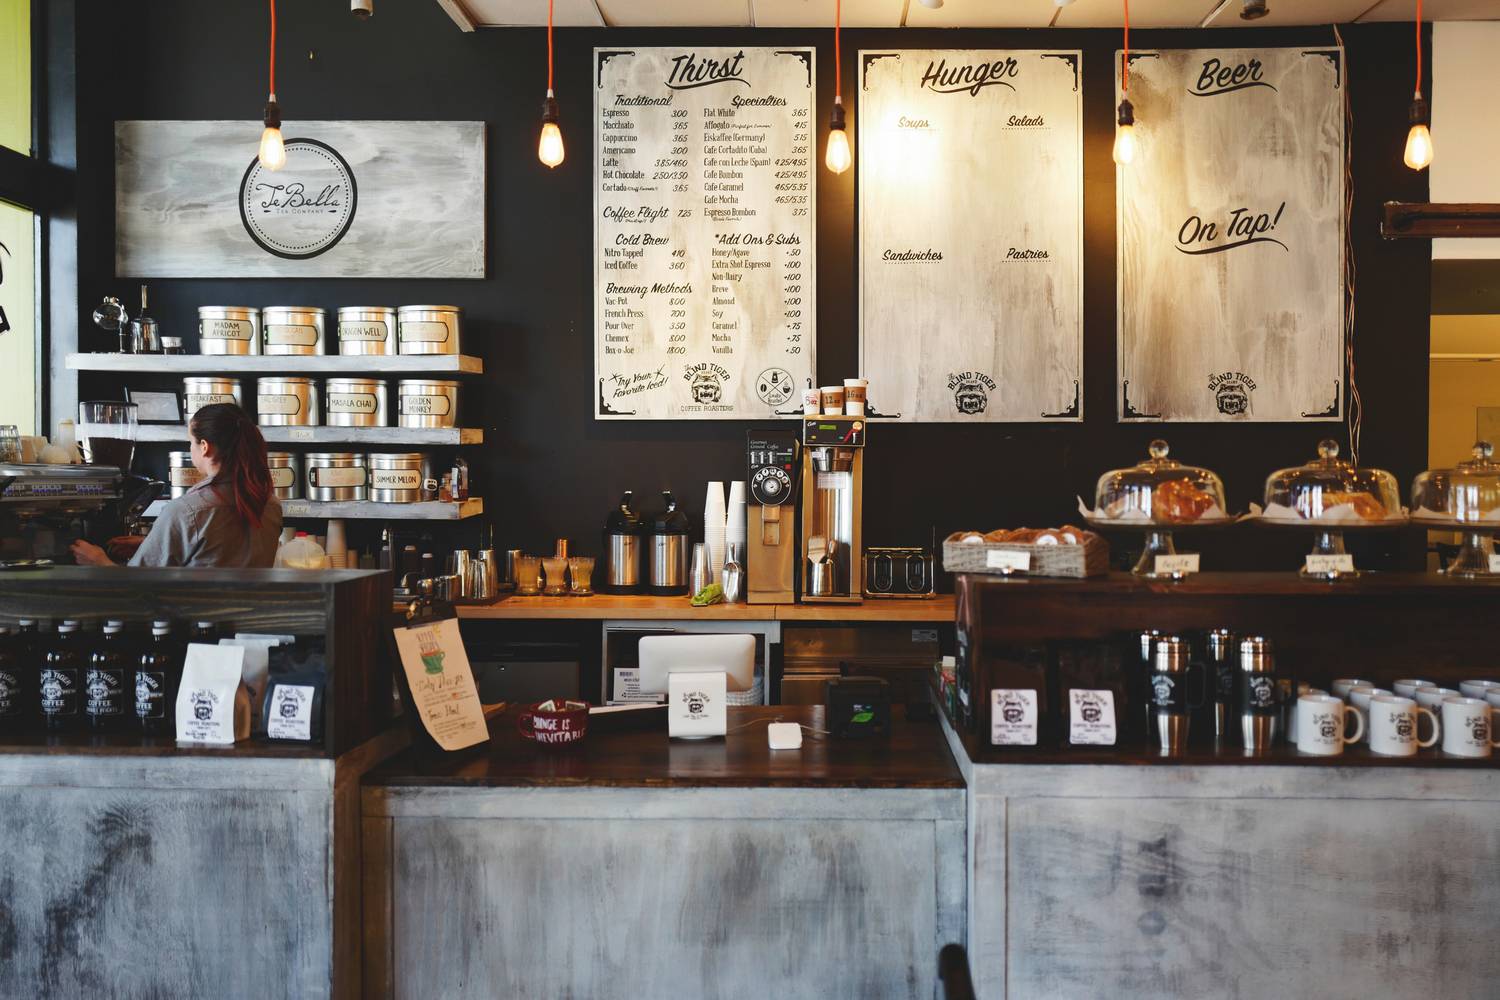 What should a good online coffee shop be like?